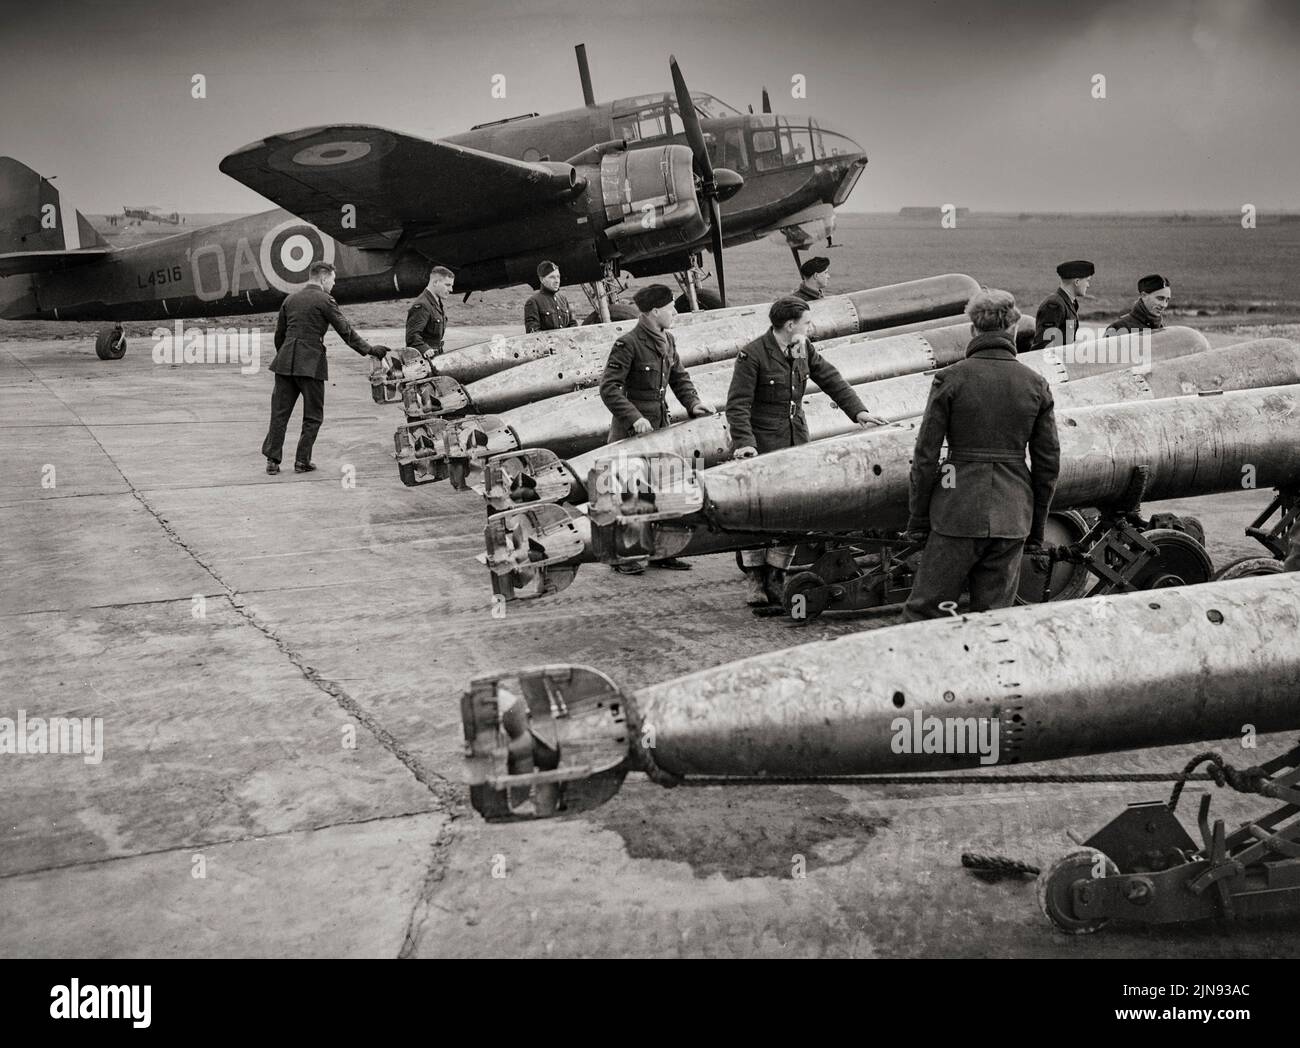 A Bristol Beaufort of No 22 Squadron with an array of torpedoes at RAF North Coates in Lincolnshire, England, operated by Coastal Command. The Bristol Beaufort was a British twin-engined torpedo bomber that first saw service with Royal Air Force Coastal Command and then the Royal Navy Fleet Air Arm from 1940. It was used as torpedo bomber, conventional bomber and mine-layer until 1942, when it was removed from active service.ANT Stock Photo